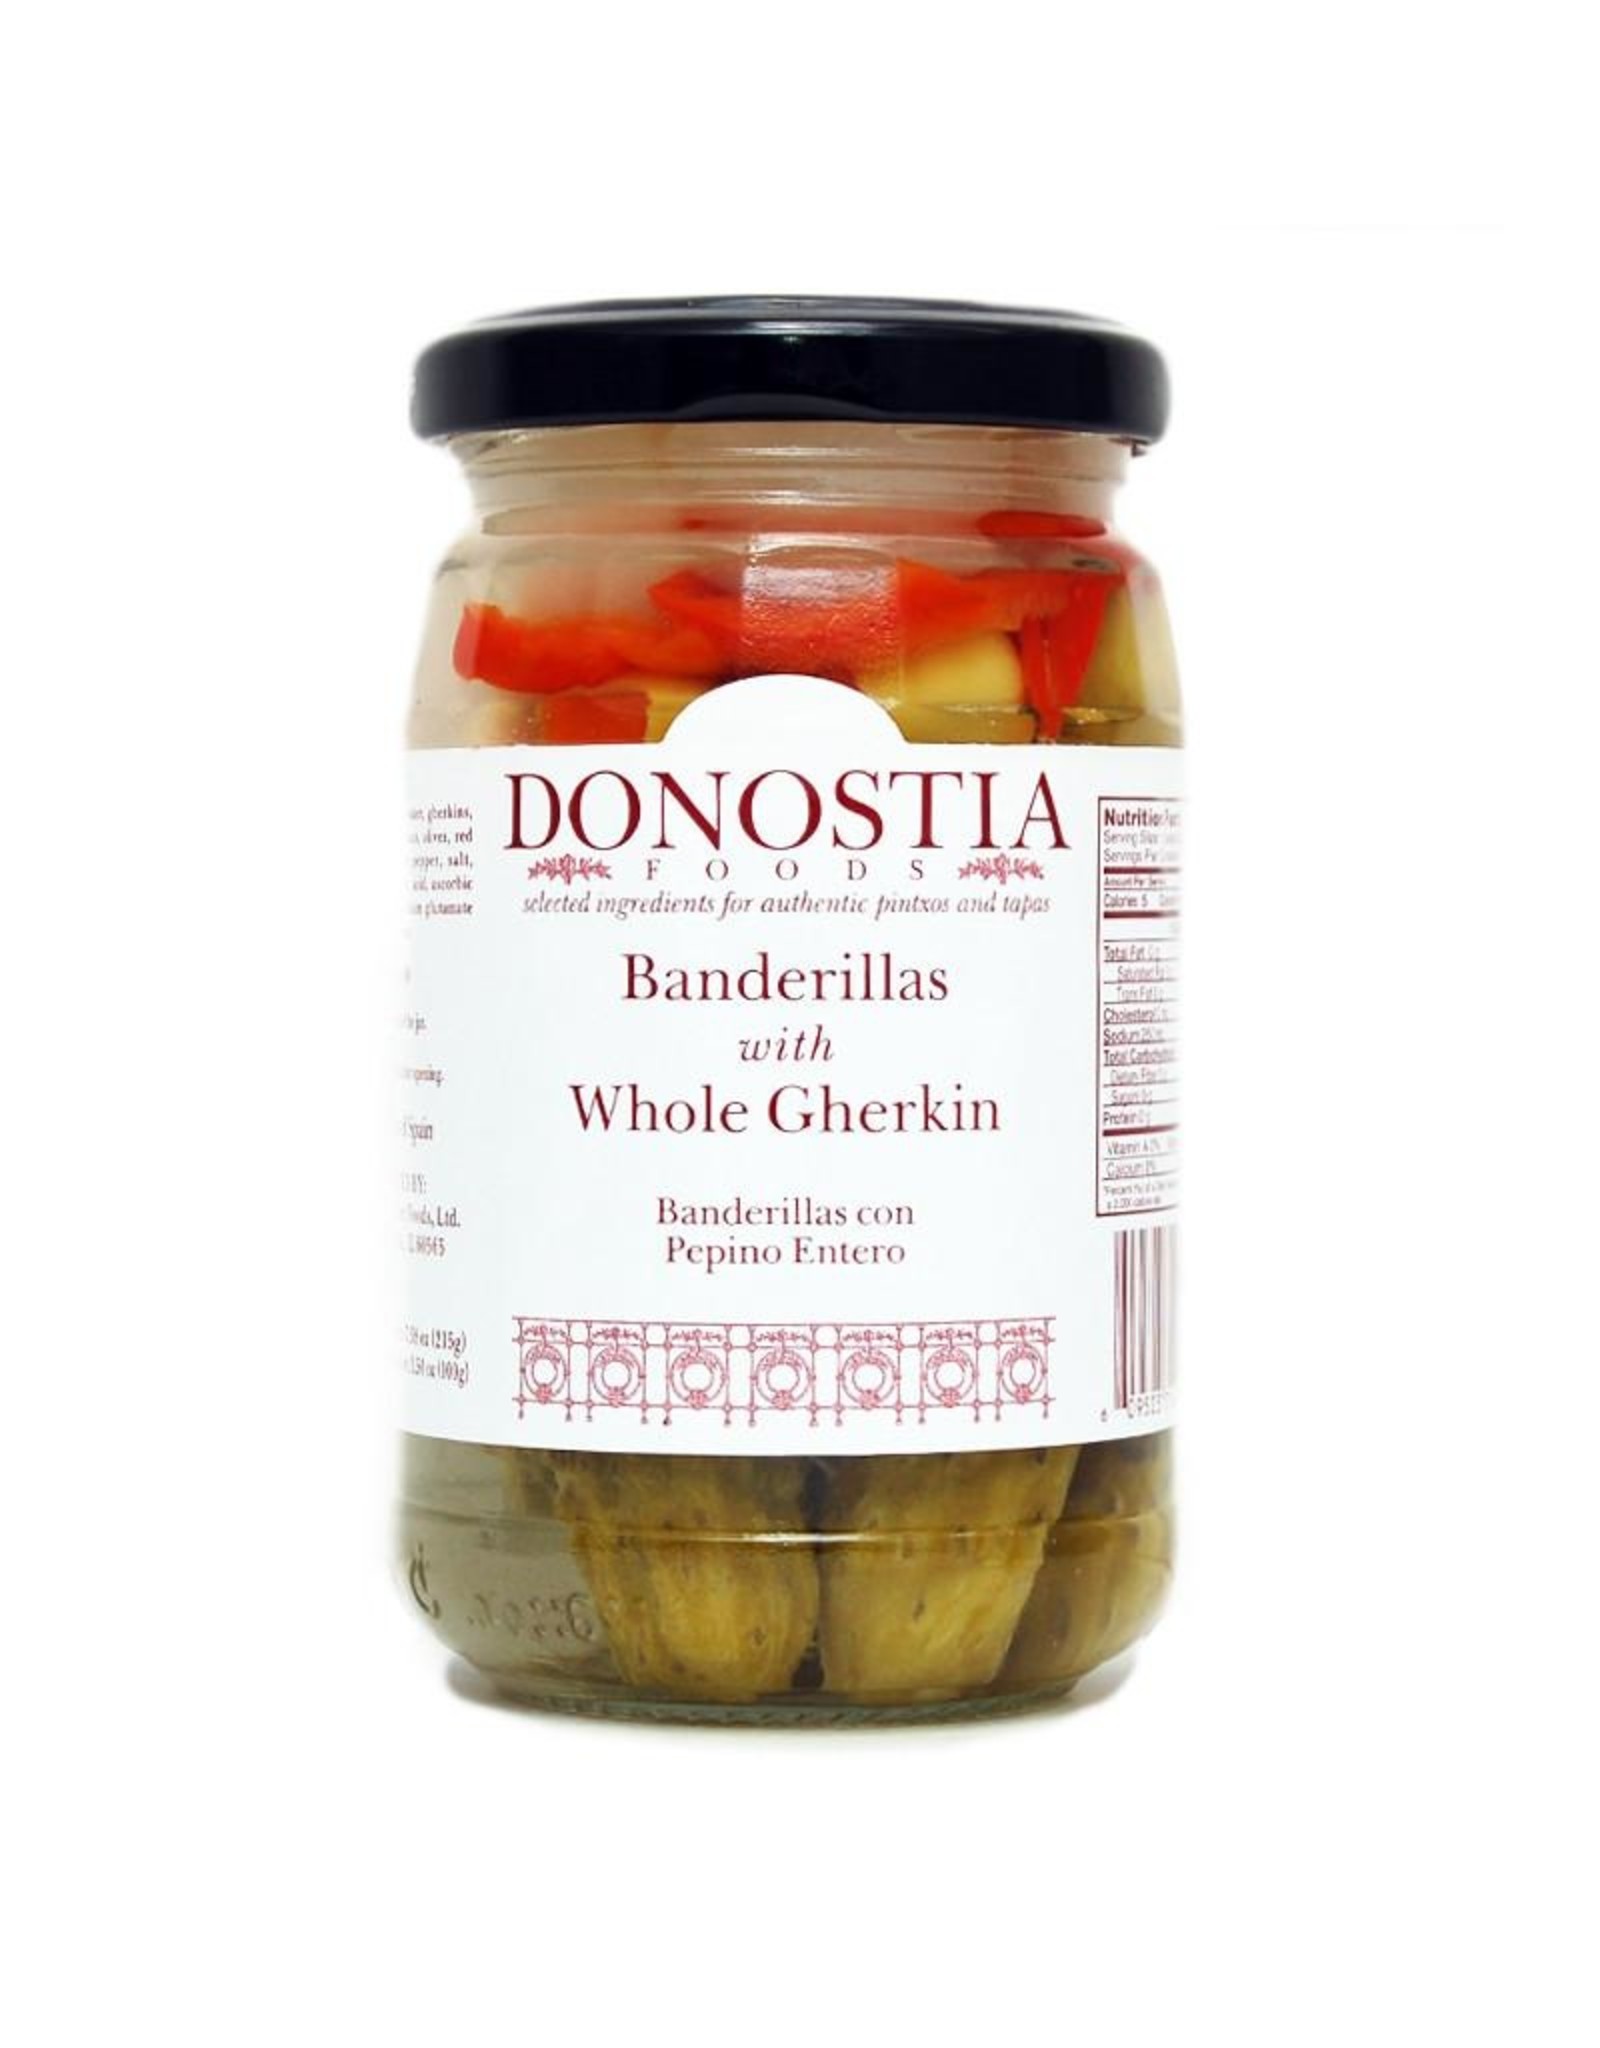 Donostia Foods Banderillas with Whole Gherkin